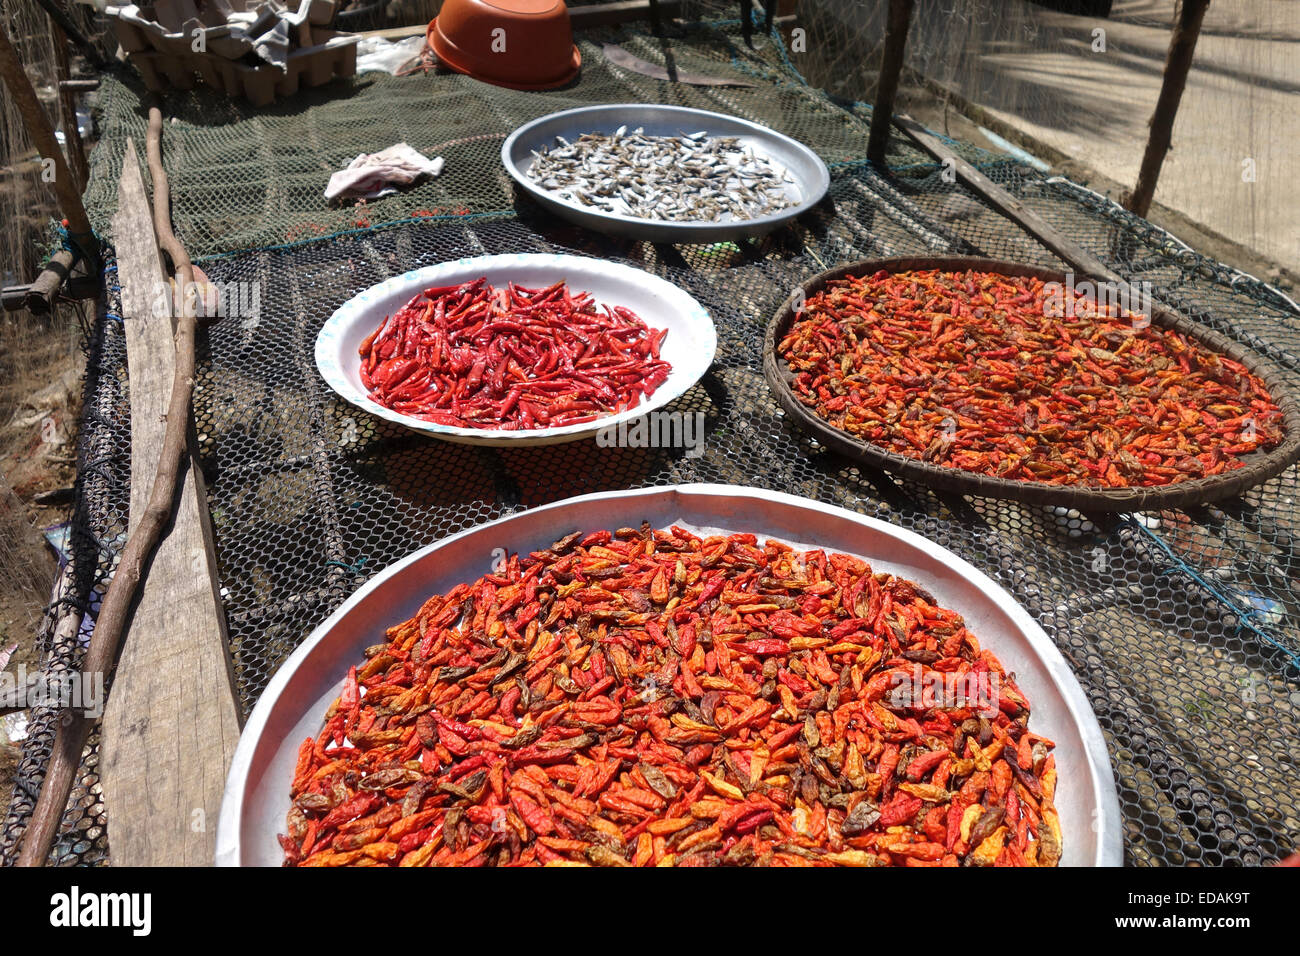 Sun dried chili peppers and dried fish on plates Sea gypsies, Koh Lanta, Krabi, Thailand, South-east Asia. Stock Photo